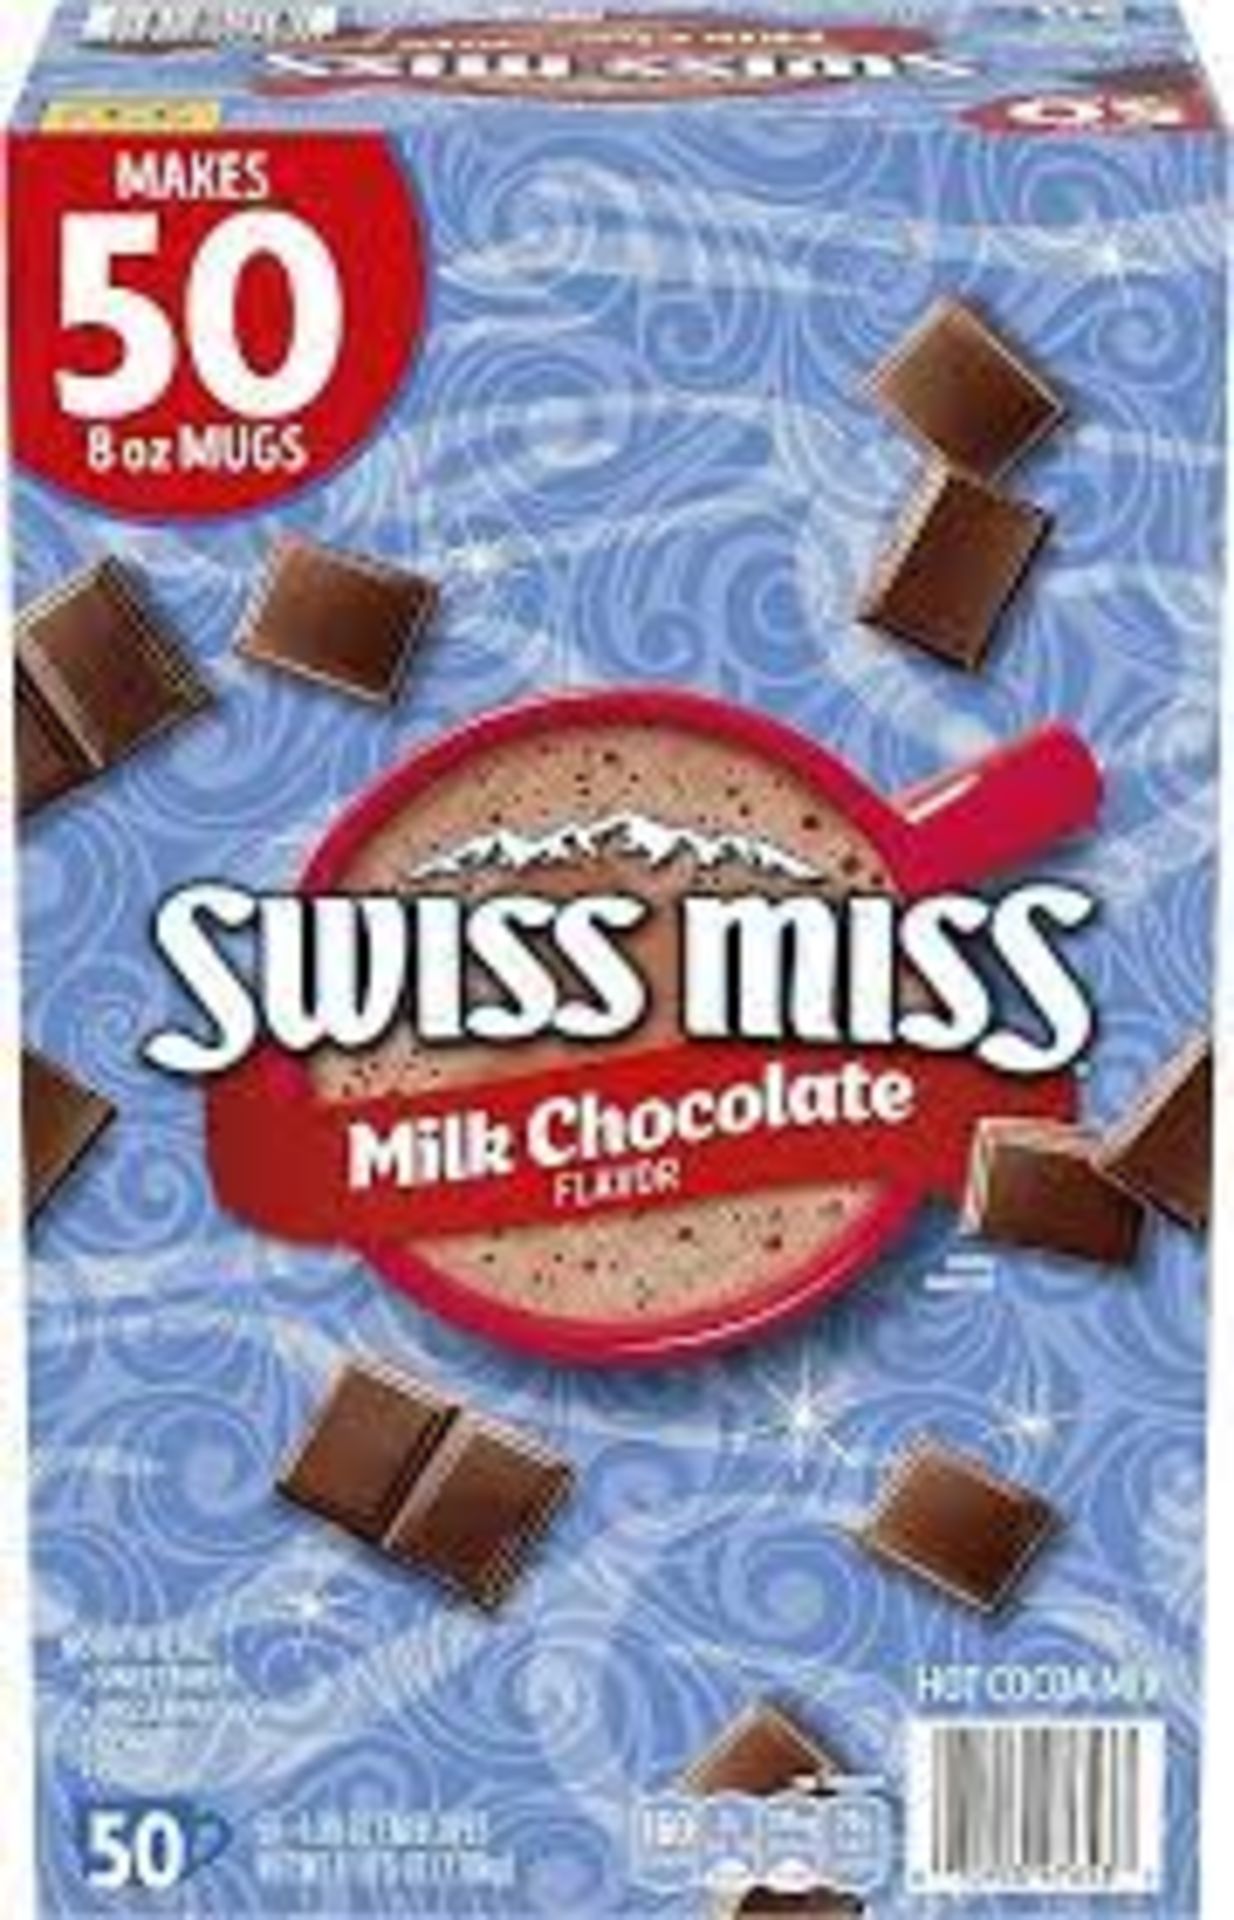 RRP £1785 (approx count 114) (I9) spSKJ31MKb6 3 Anbobo Swiss Miss Milk Chocolate Hot Cocoa Drink Mix